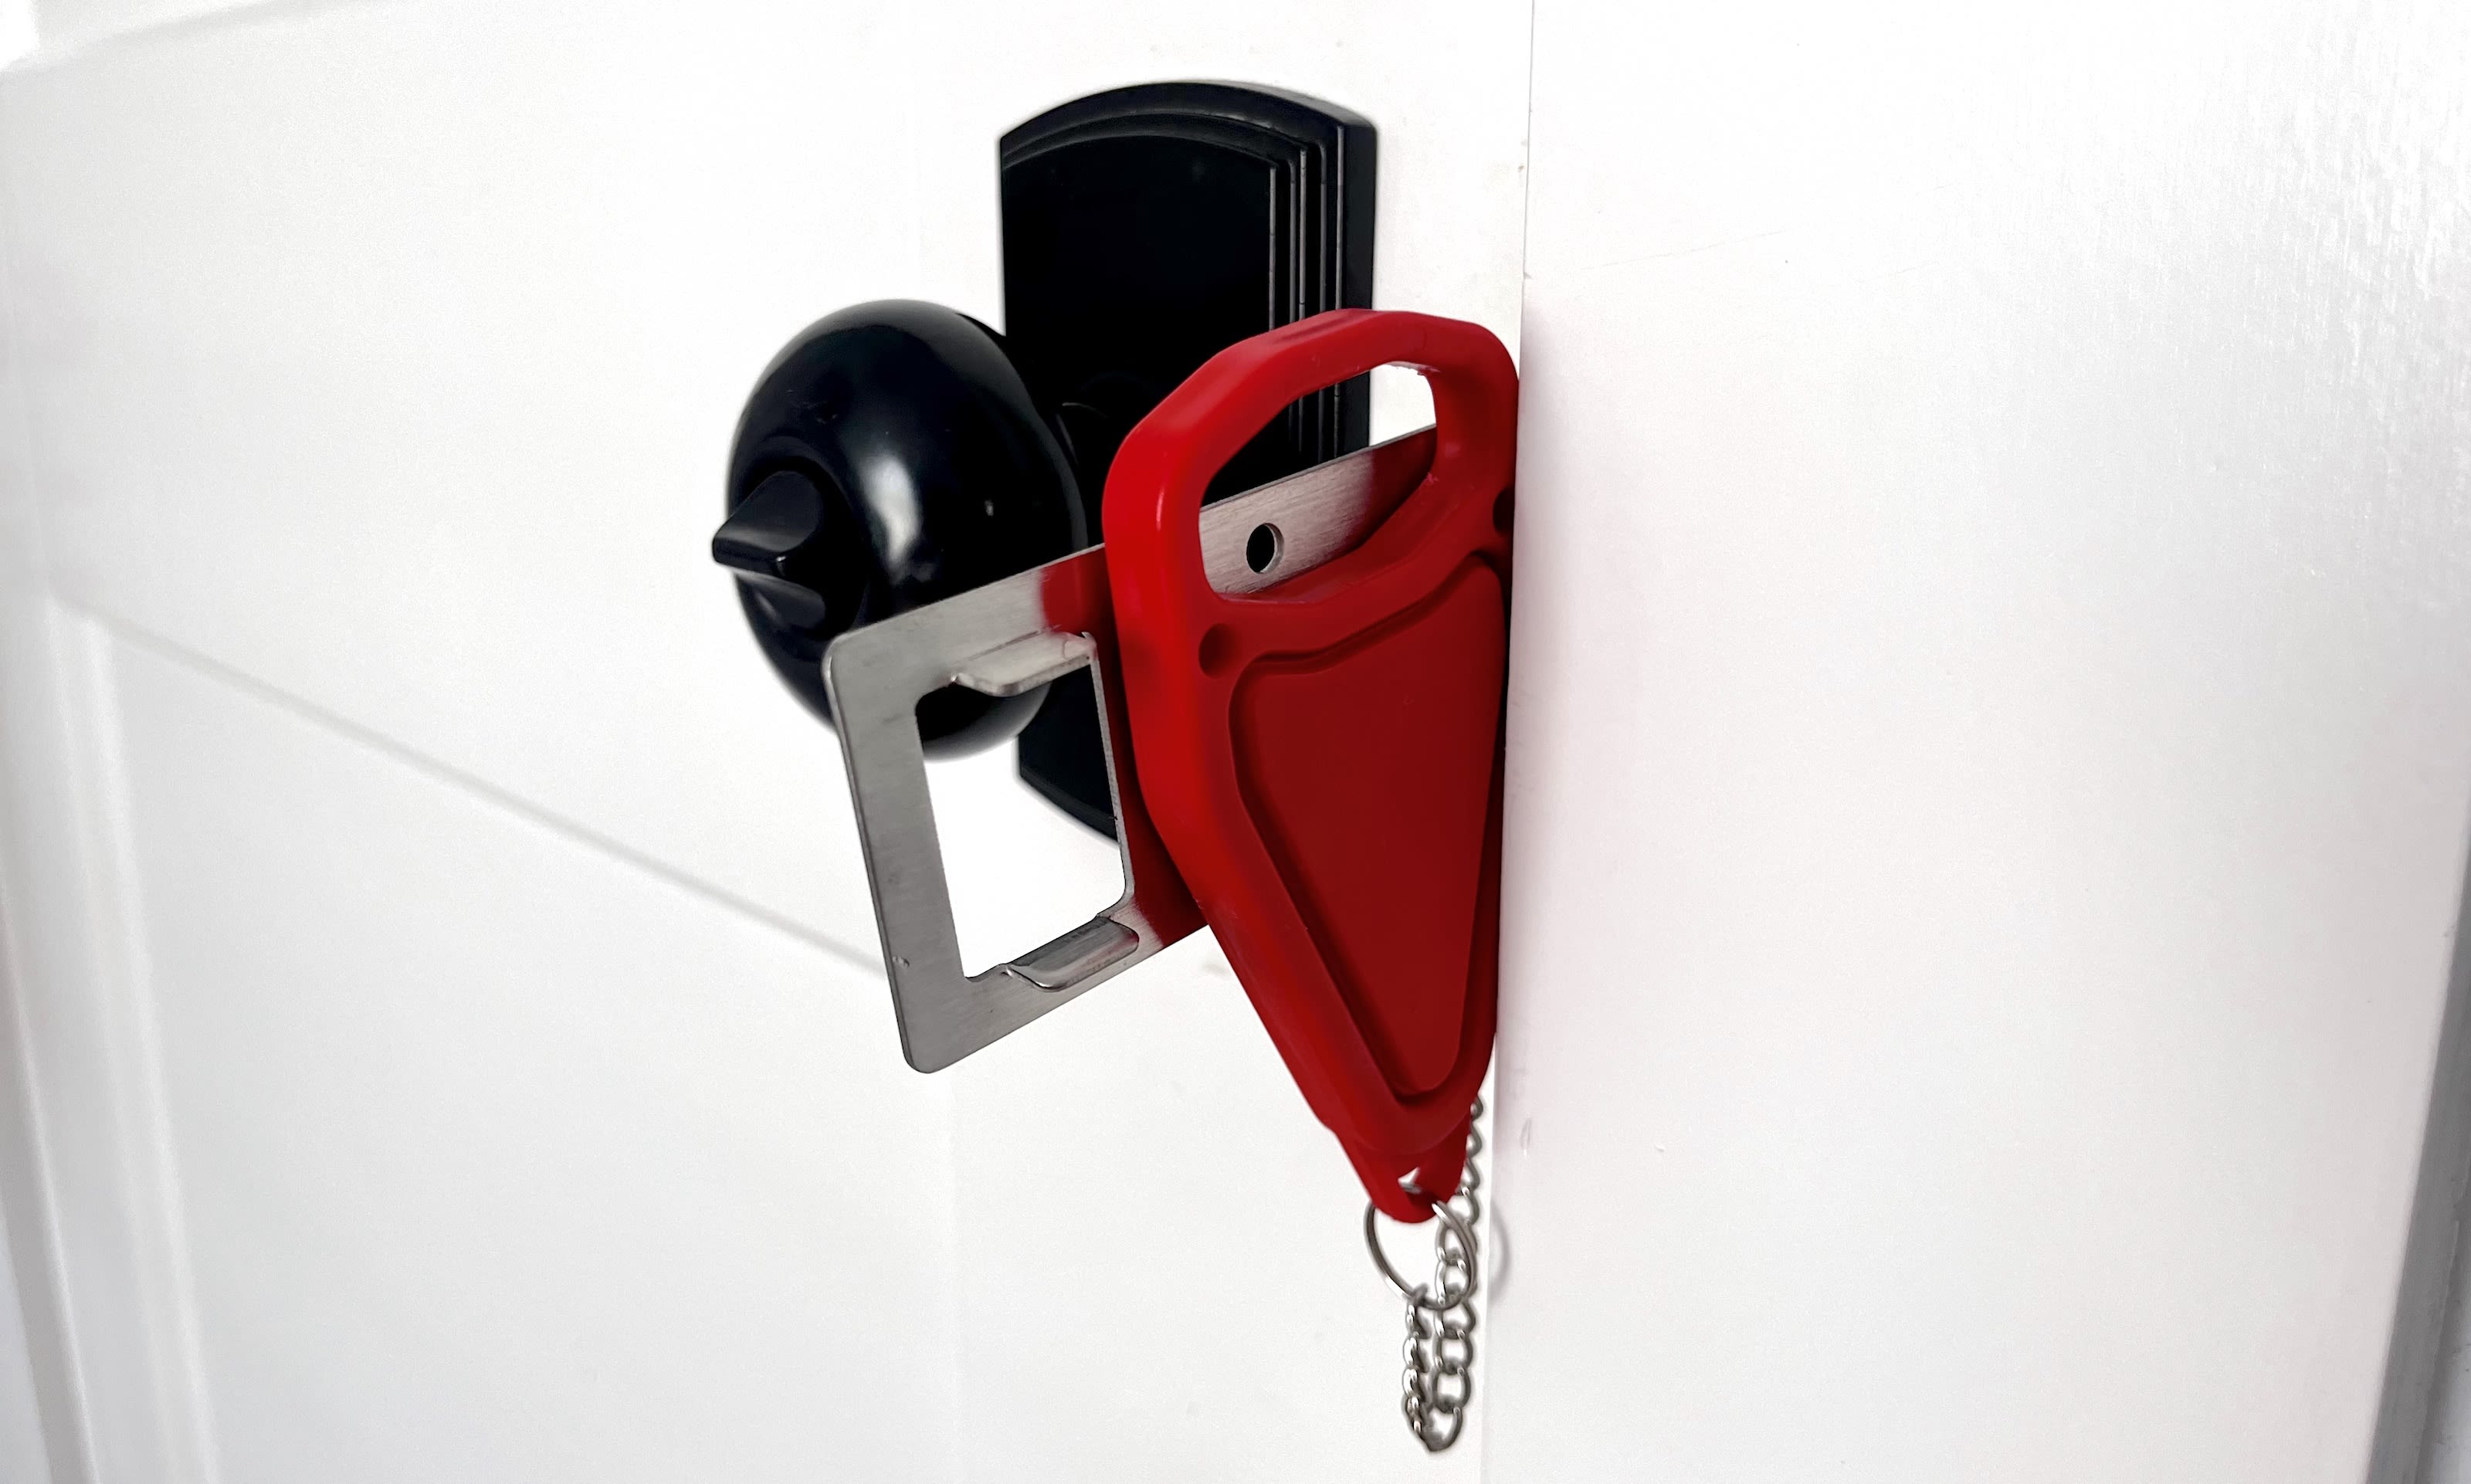 Under $25 scores: The AceMining Portable Door Lock is the safety tool  everyone should pack | CNN Underscored